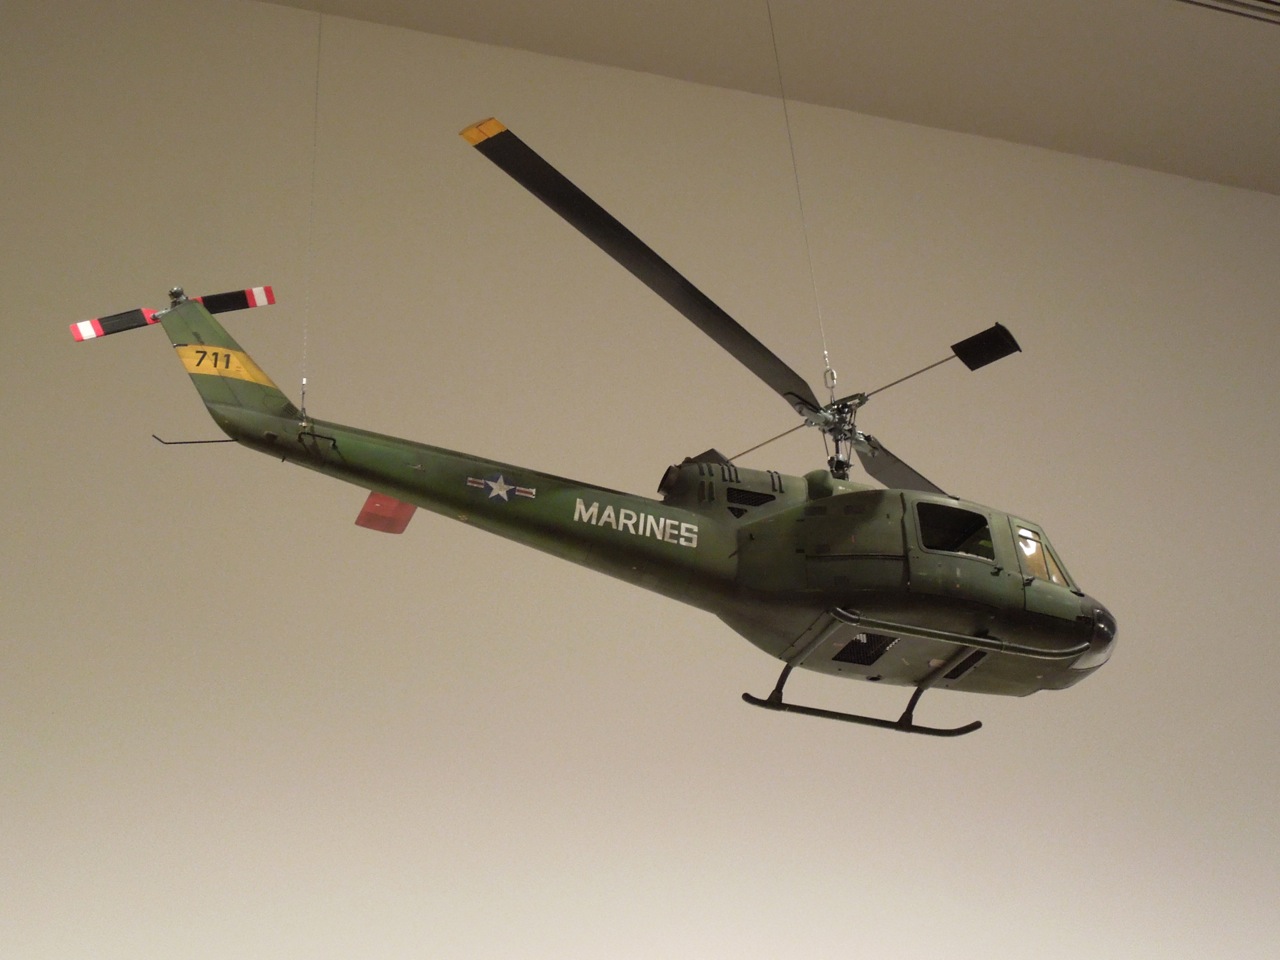 Hollywood Movie Costumes and Props: Full Metal Jacket helicopter model 